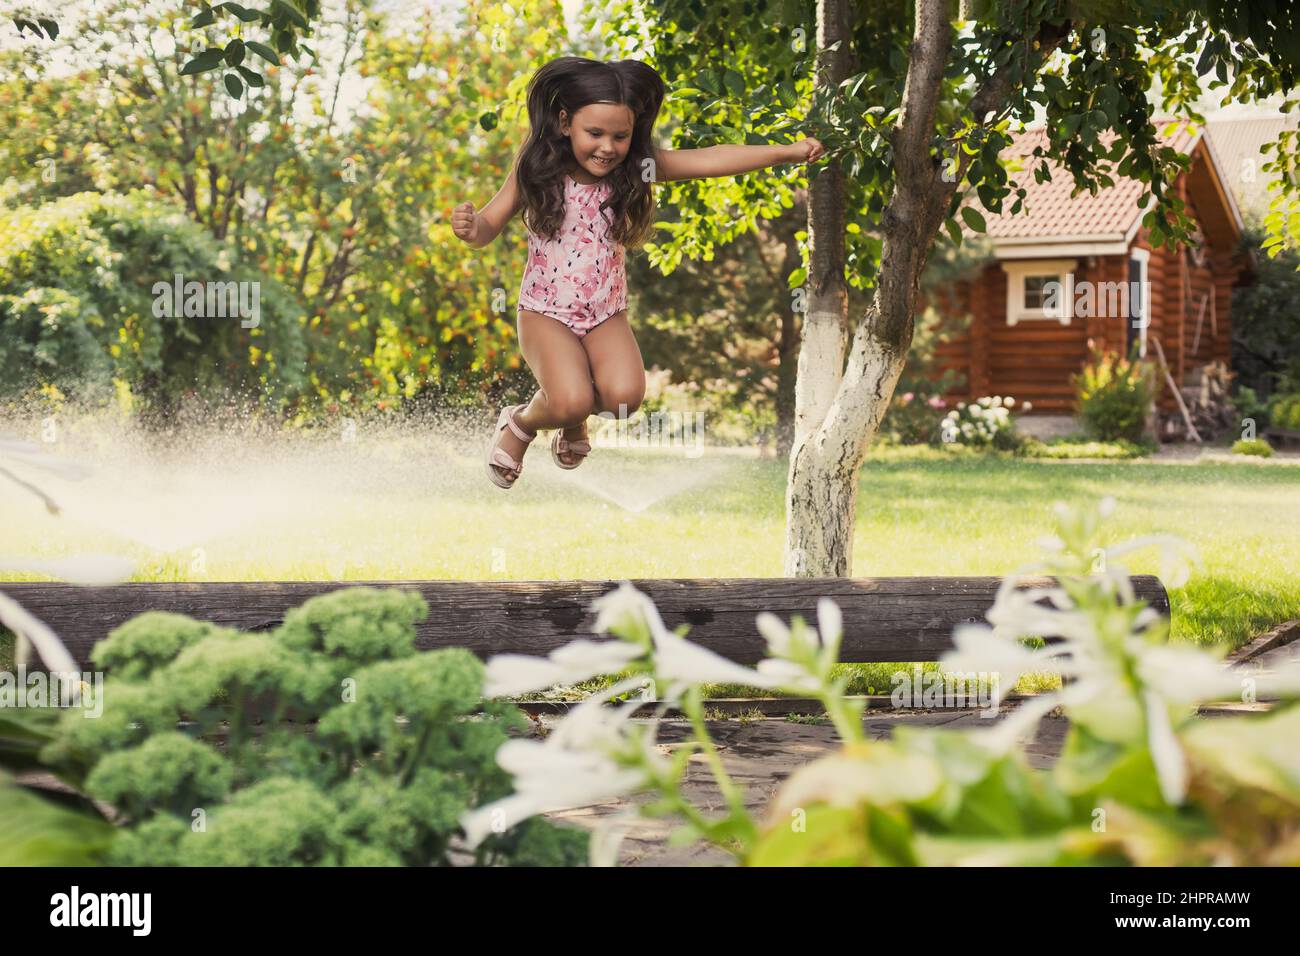 Excited female child playing outside jumping off log looking down in backyard indulging with trees and water sprinklers in background in daytime Stock Photo